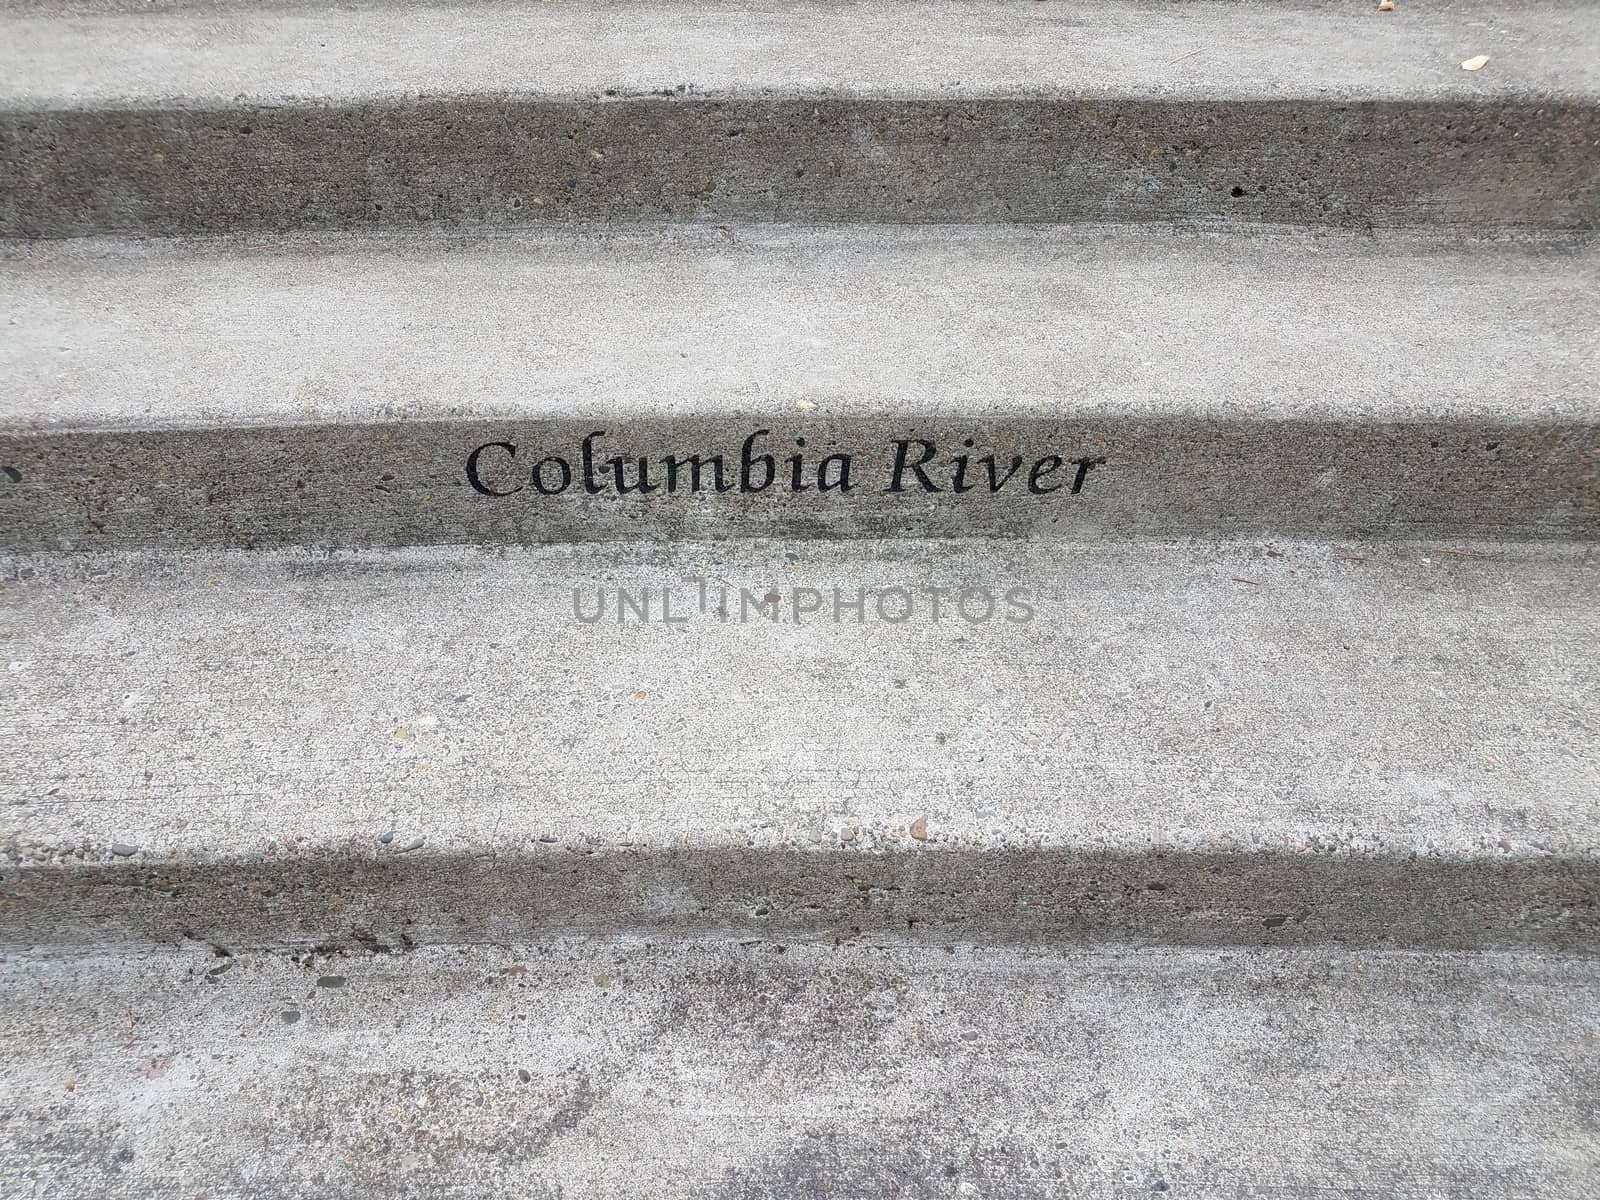 grey cement steps or stairs with Columbia River sign by stockphotofan1